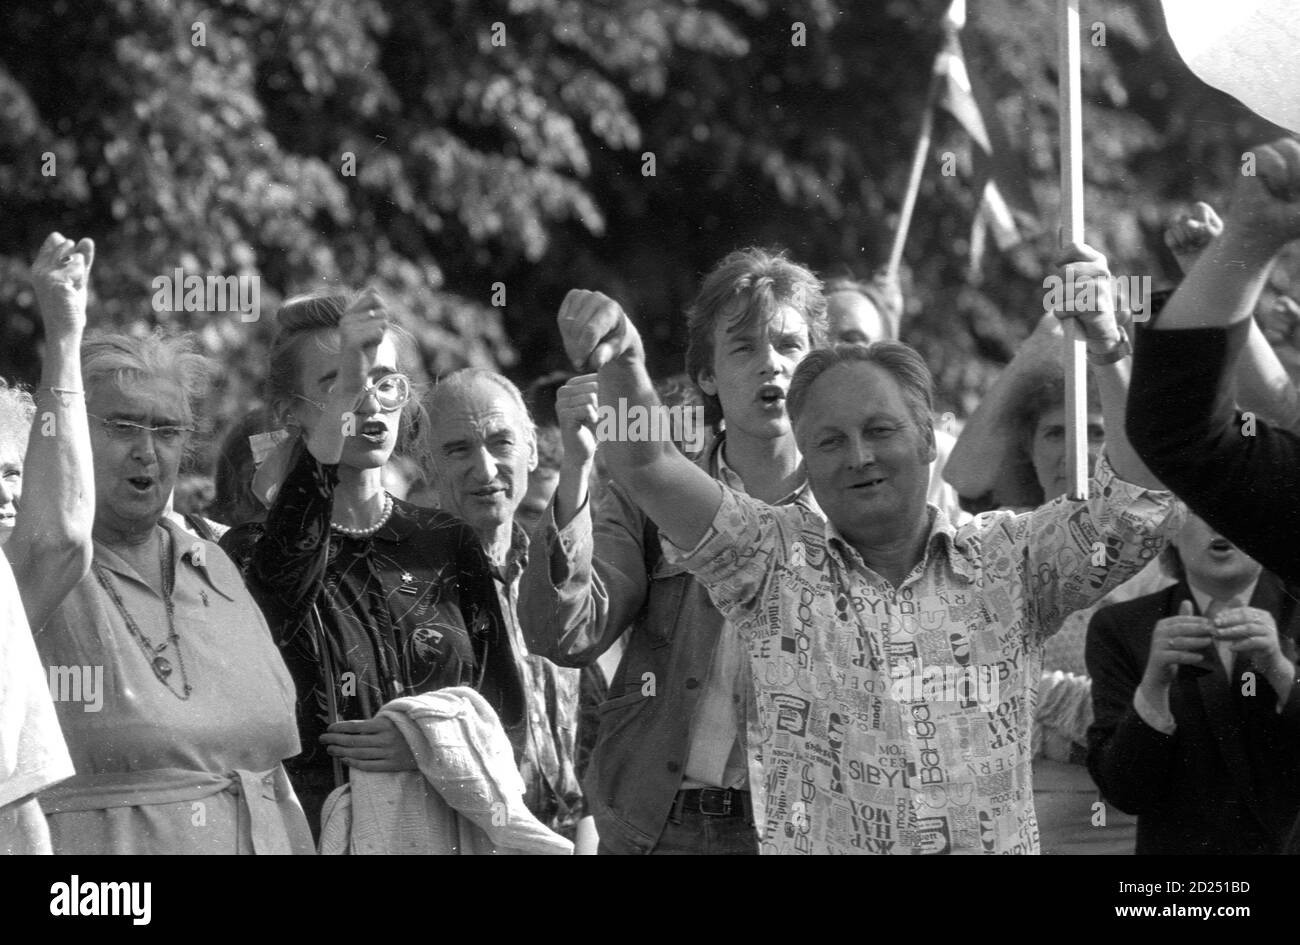 People hold hands as they participate in a human chain during the Baltic Way near Riga August 23, 1989. Runners left Lithuania and Estonia on August 22, 2009, for neighbouring Latvia to start events marking the 20th anniversary of a 600 km (375 mile) human chain that showed the Balts' wish to regain their independence from the Soviet Union. More than two million people in the Baltic countries of Estonia, Latvia and Lithuania joined hands in one of the biggest mass protests seen against the former Soviet Union and demanded the restoration of independence. Picture taken August 23, 1989. REUTERS/ Stock Photo